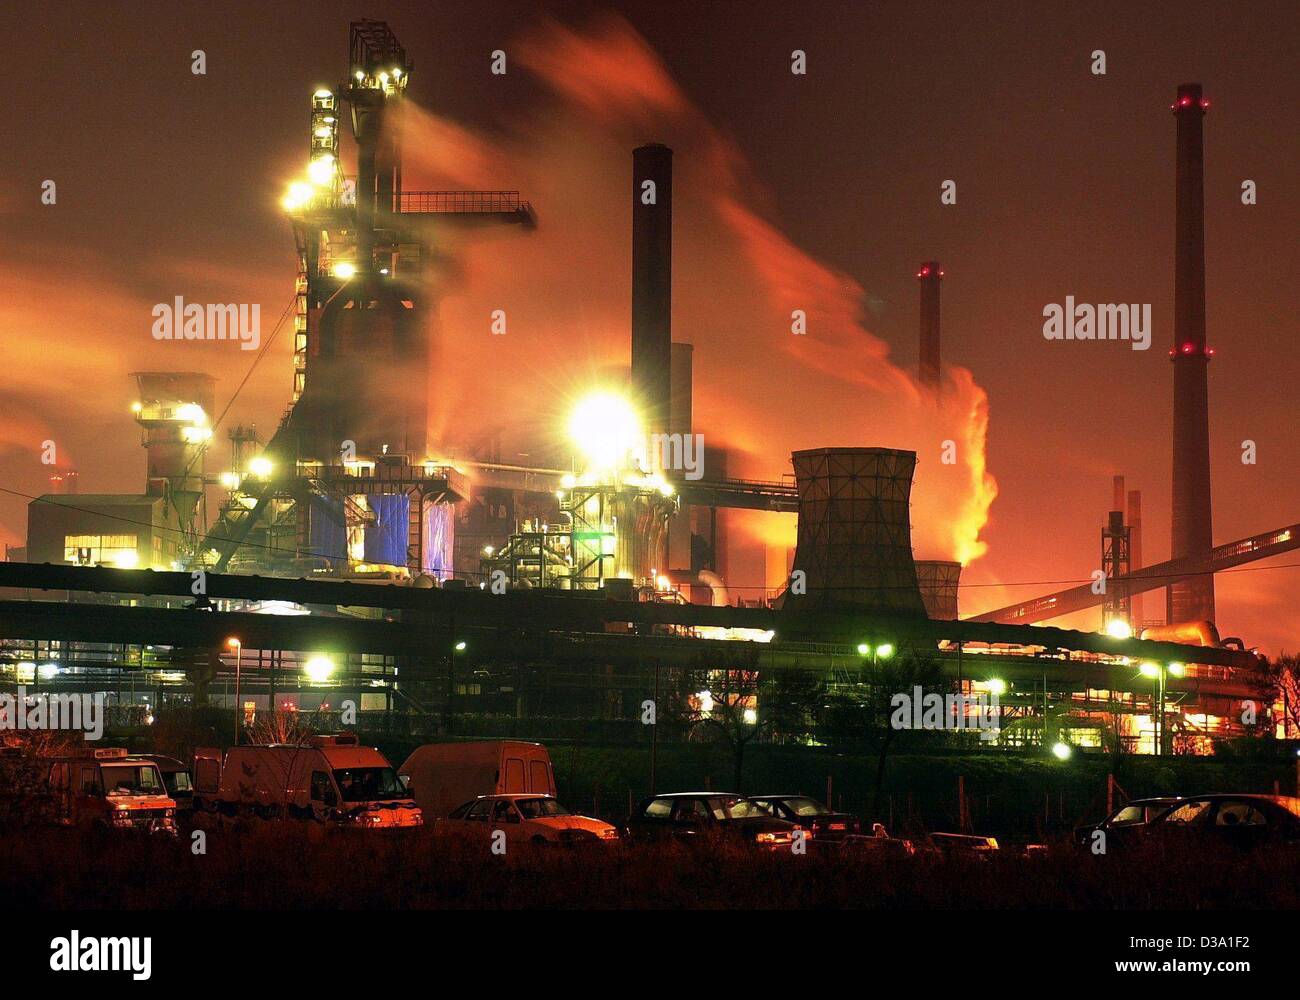 (dpa) - The steel mill of German steel group ThyssenKrupp in Duisburg, 11 January 2001. At night the huge melting pots illuminate the sky in fiery red. Measuring 12 square kilometers, the steelwork is one of Germany's biggest industrial plants. Stock Photo